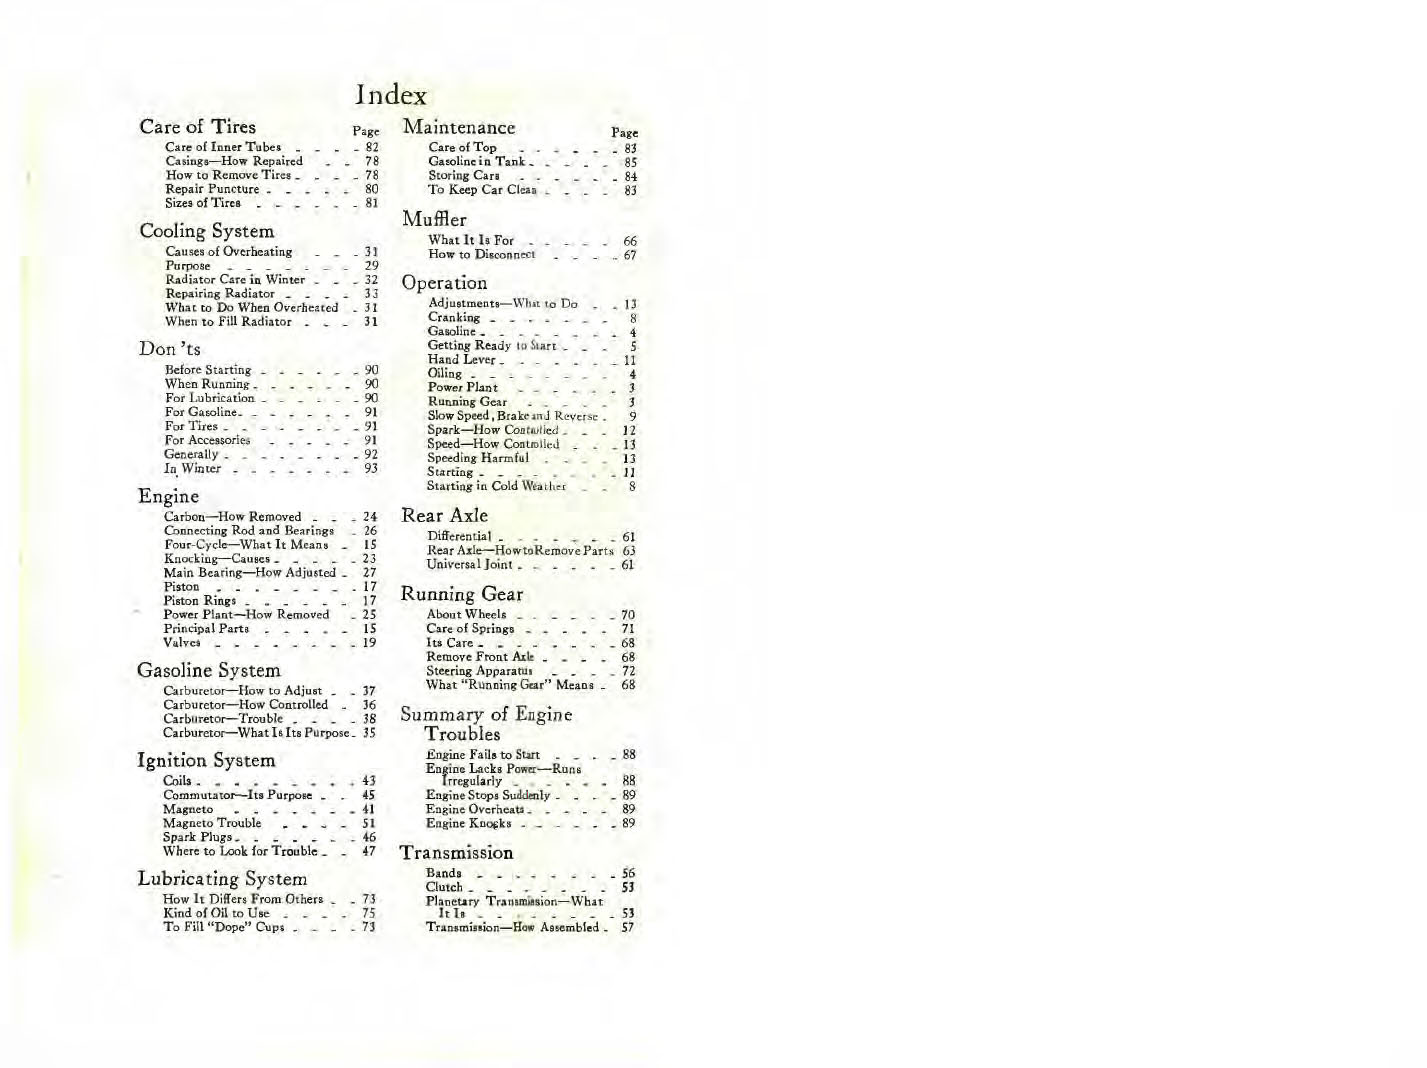 1915_Ford_Owners_Manual-94-95